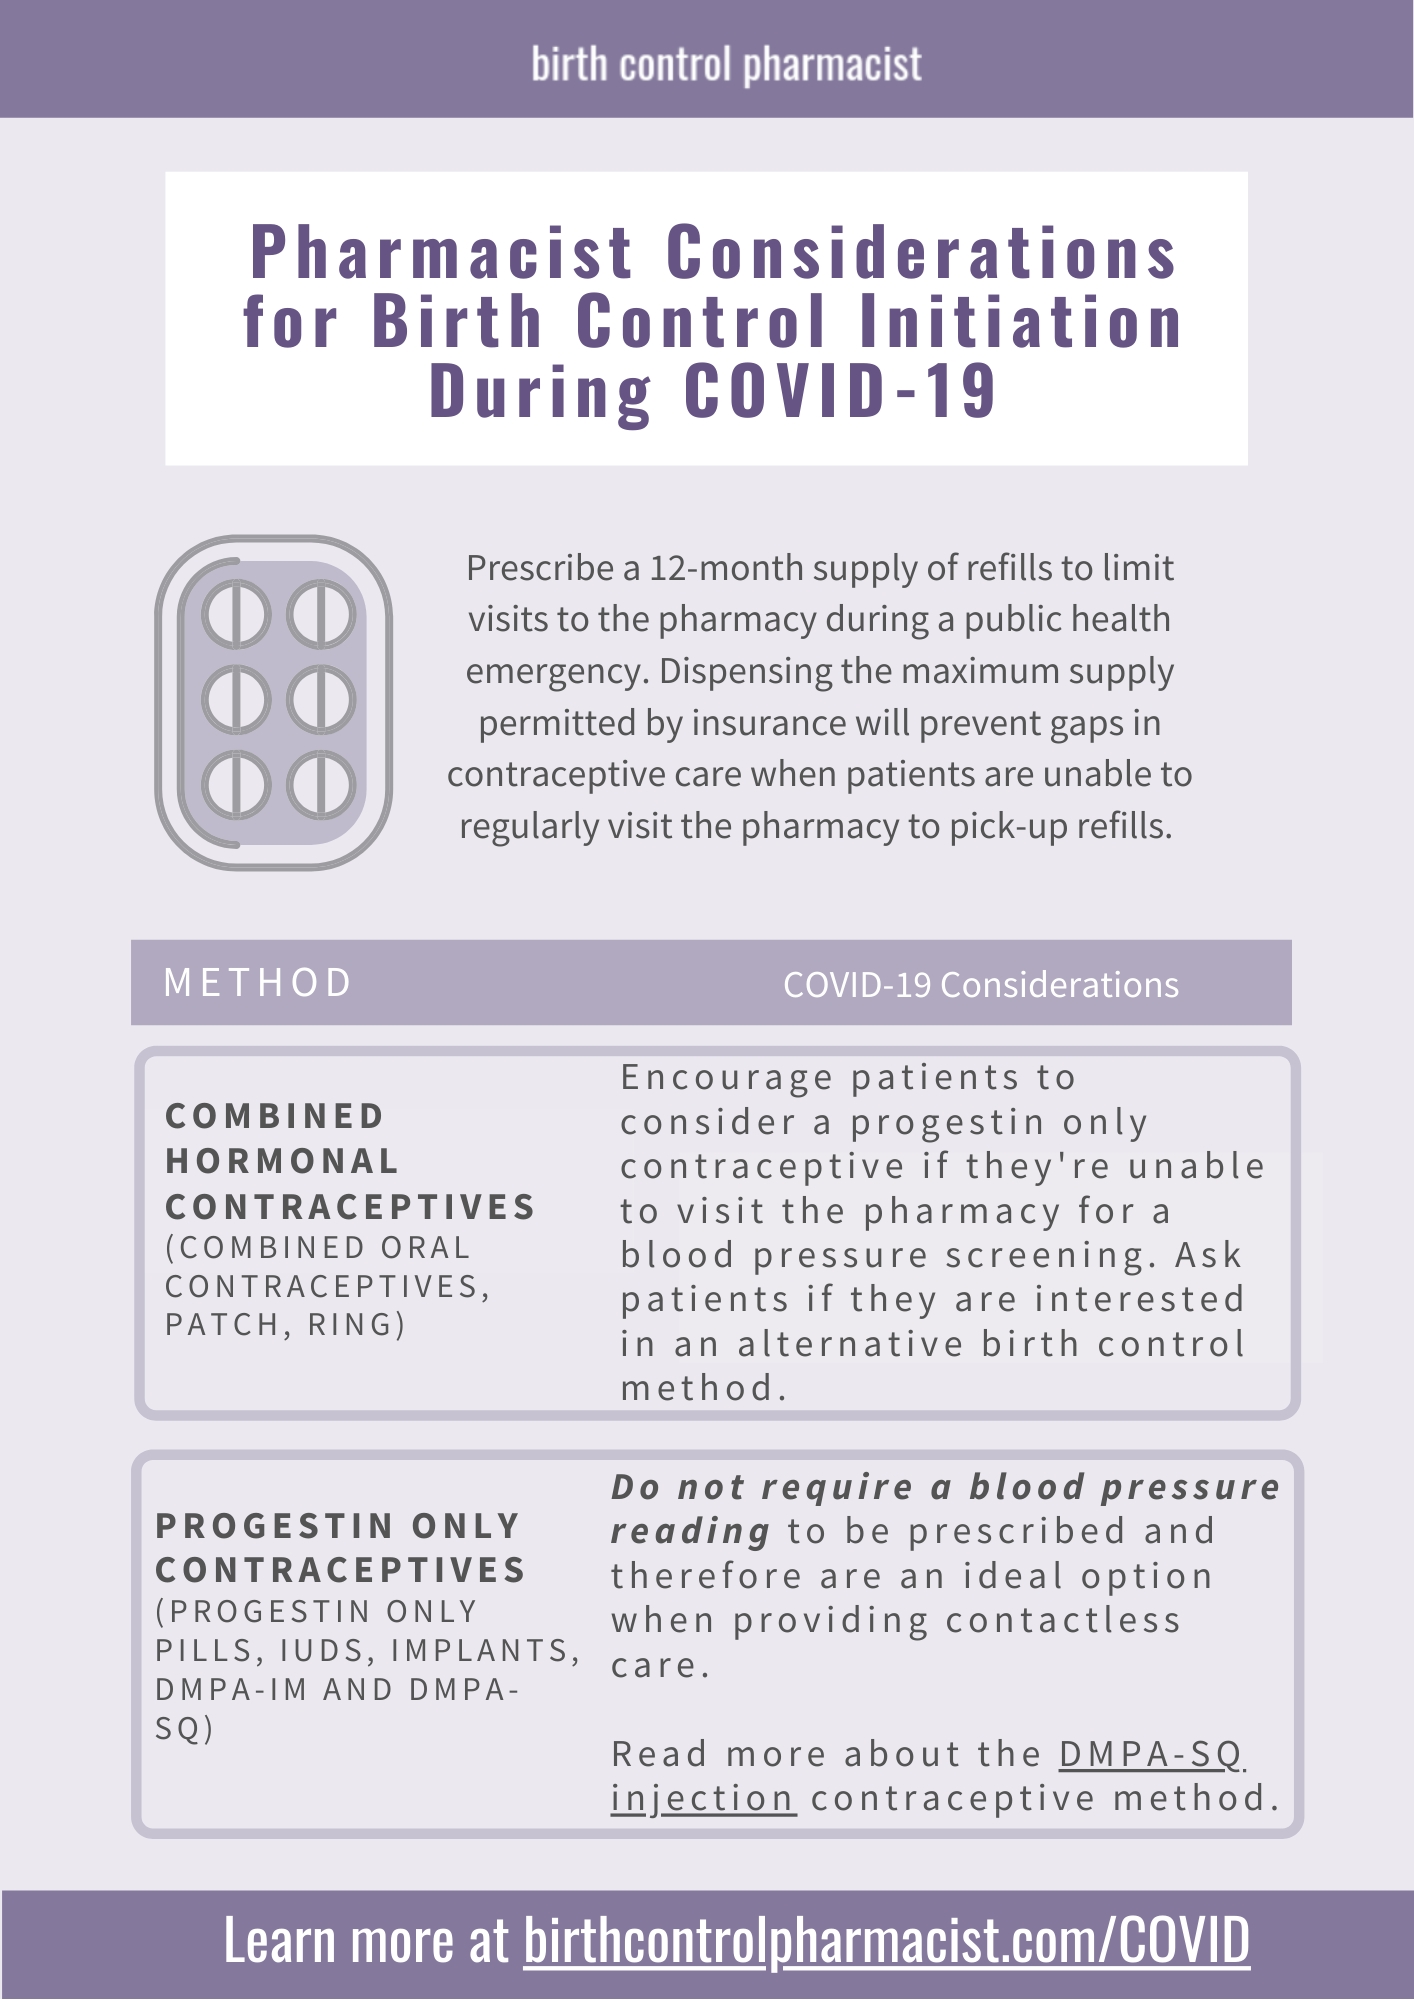 Blog – Page 2 – Birth Control Pharmacist  When Is Next Depoprovera Injection Due After April 1, 2021